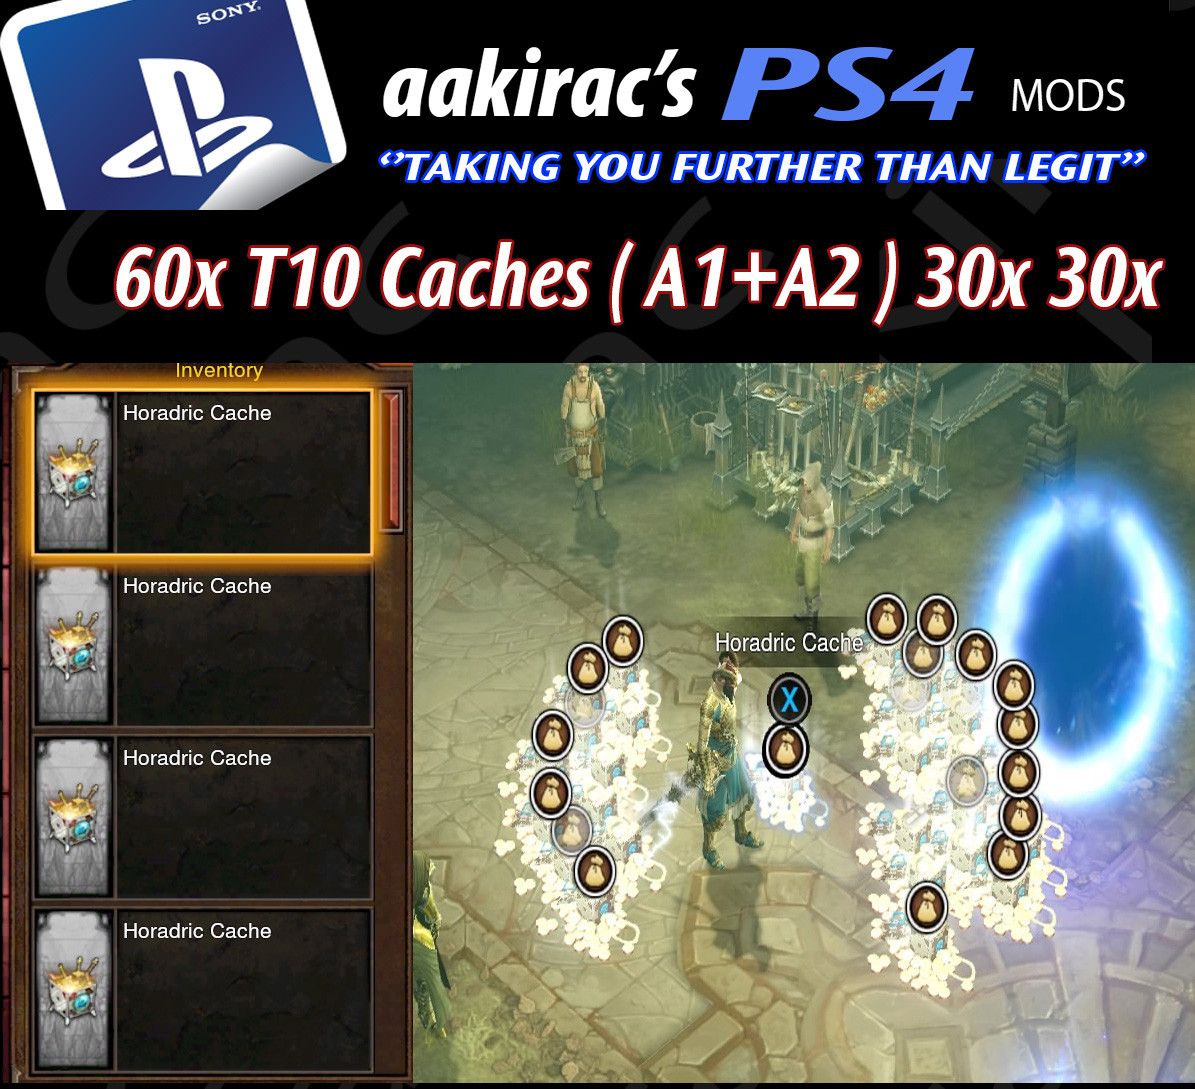 T10 Cache's for Diablo 3 Diablo 3 Mods ROS Seasonal and Non Seasonal Save Mod - Modded Items and Gear - Hacks - Cheats - Trainers for Playstation 4 - Playstation 5 - Nintendo Switch - Xbox One